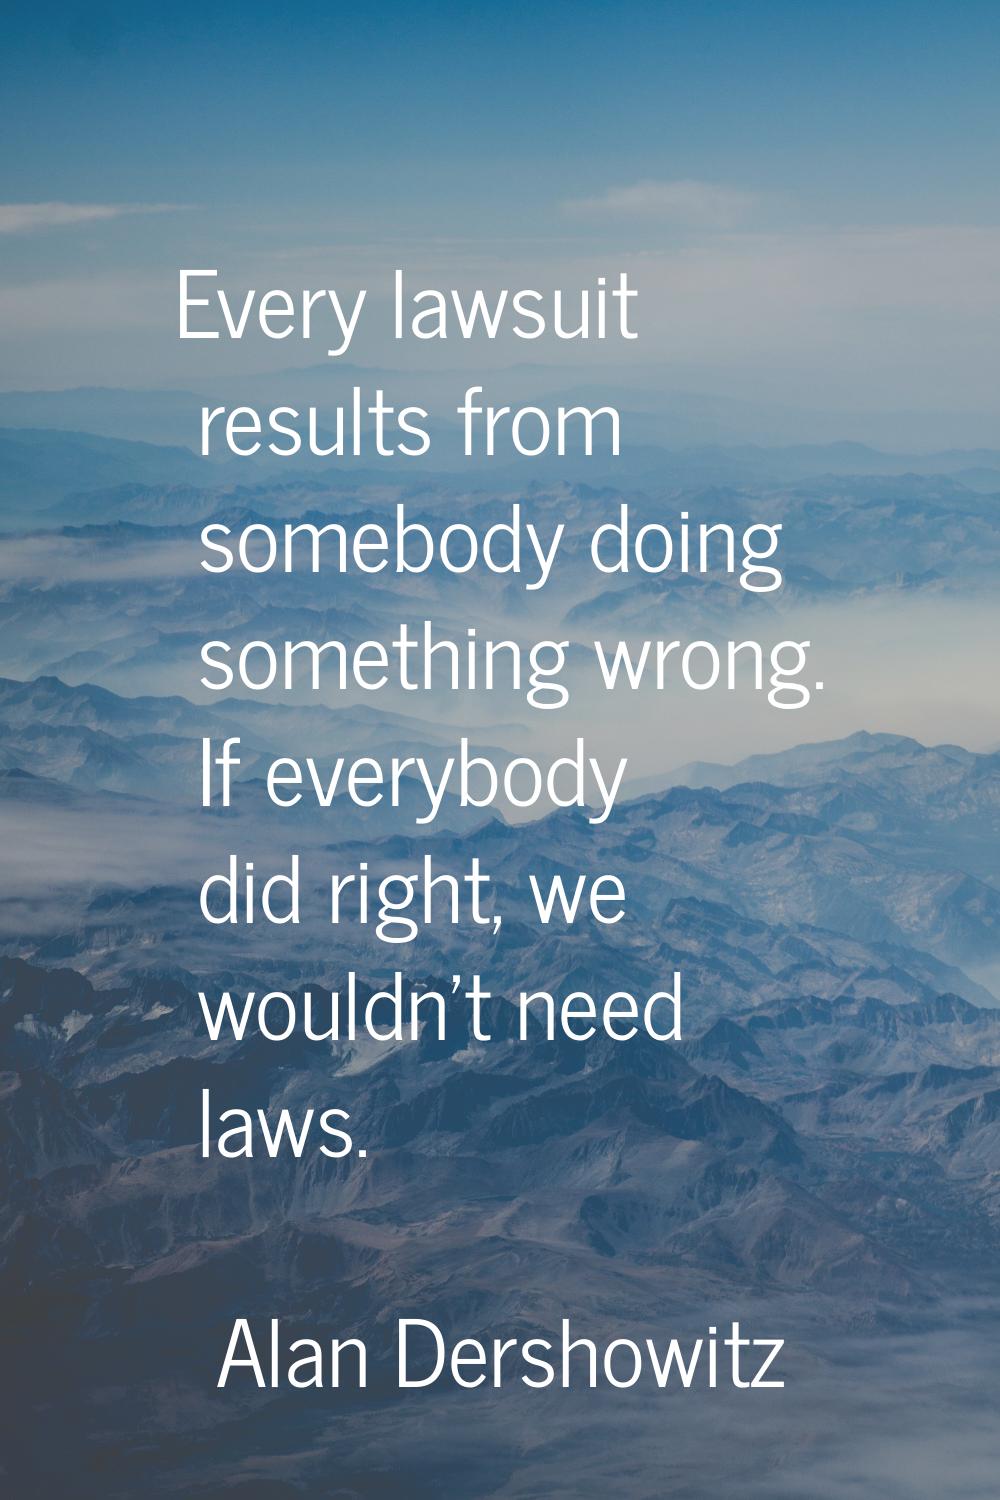 Every lawsuit results from somebody doing something wrong. If everybody did right, we wouldn't need